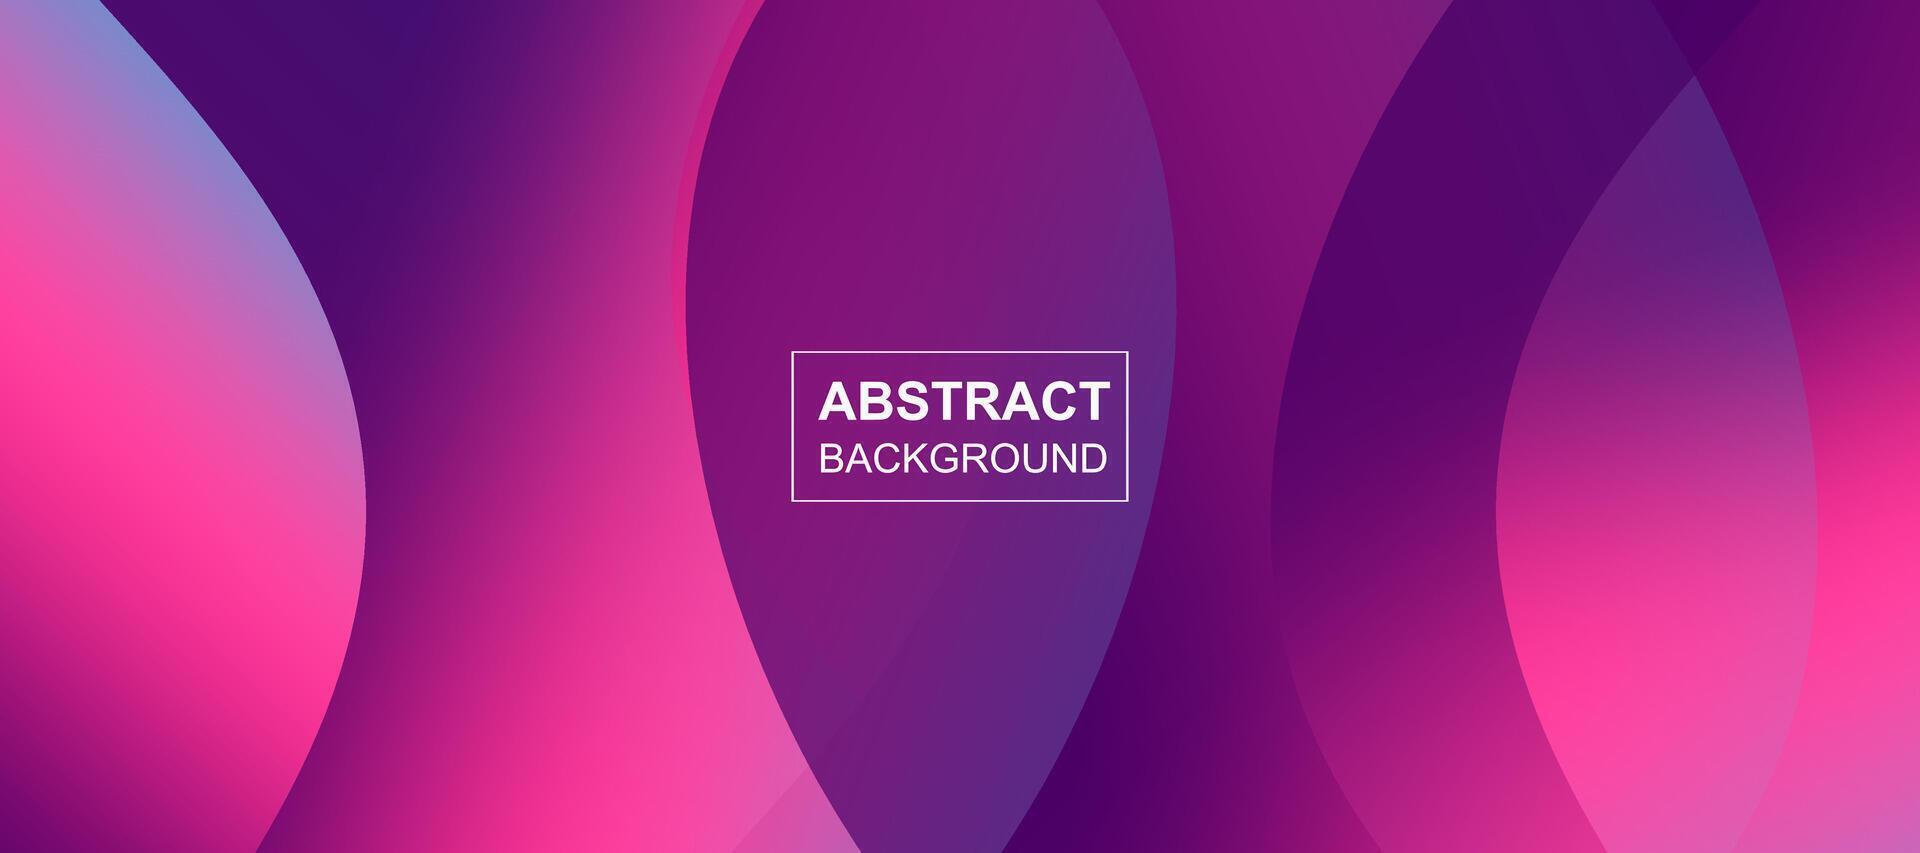 Modern abstract colorful template background. Website banner illustration design vector